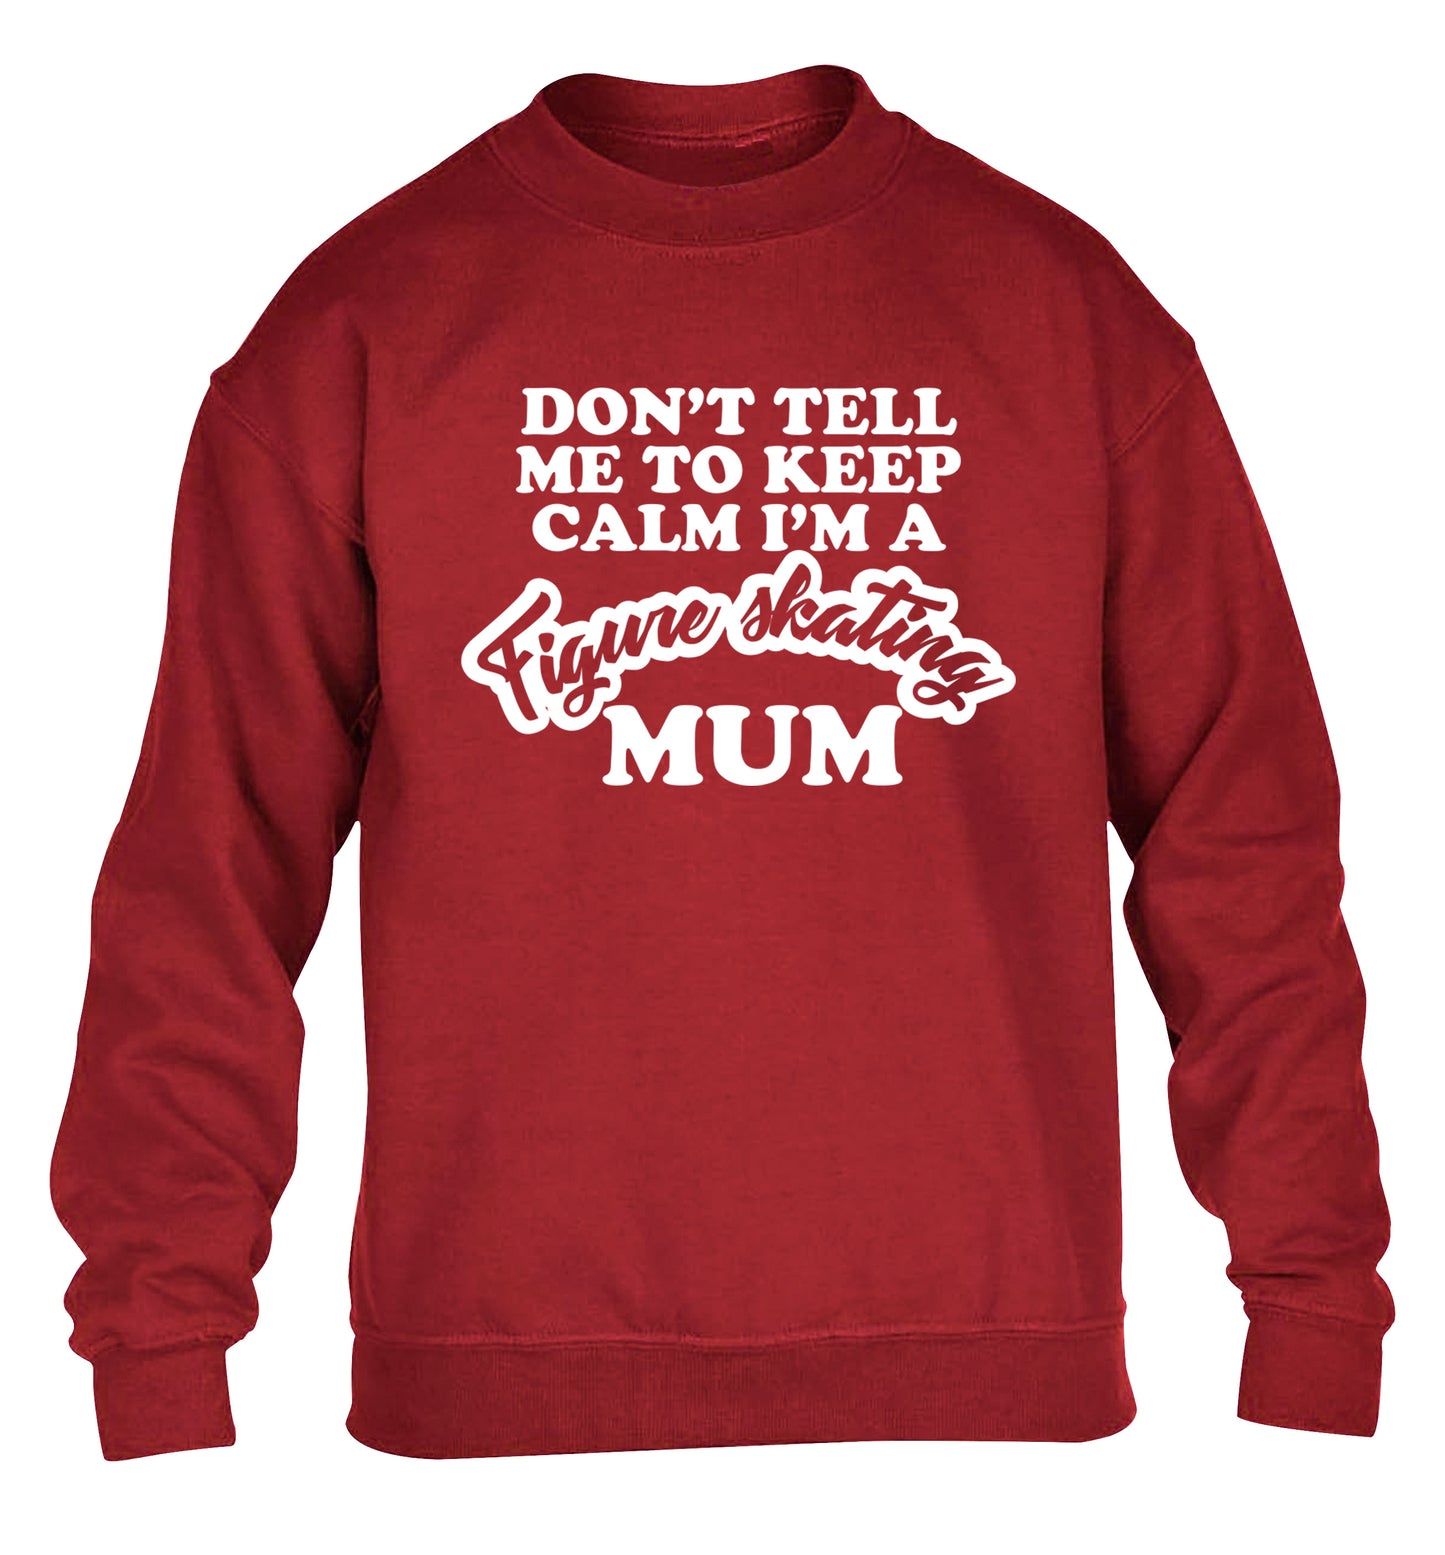 Don't tell me to keep calm I'm a figure skating mum children's grey sweater 12-14 Years